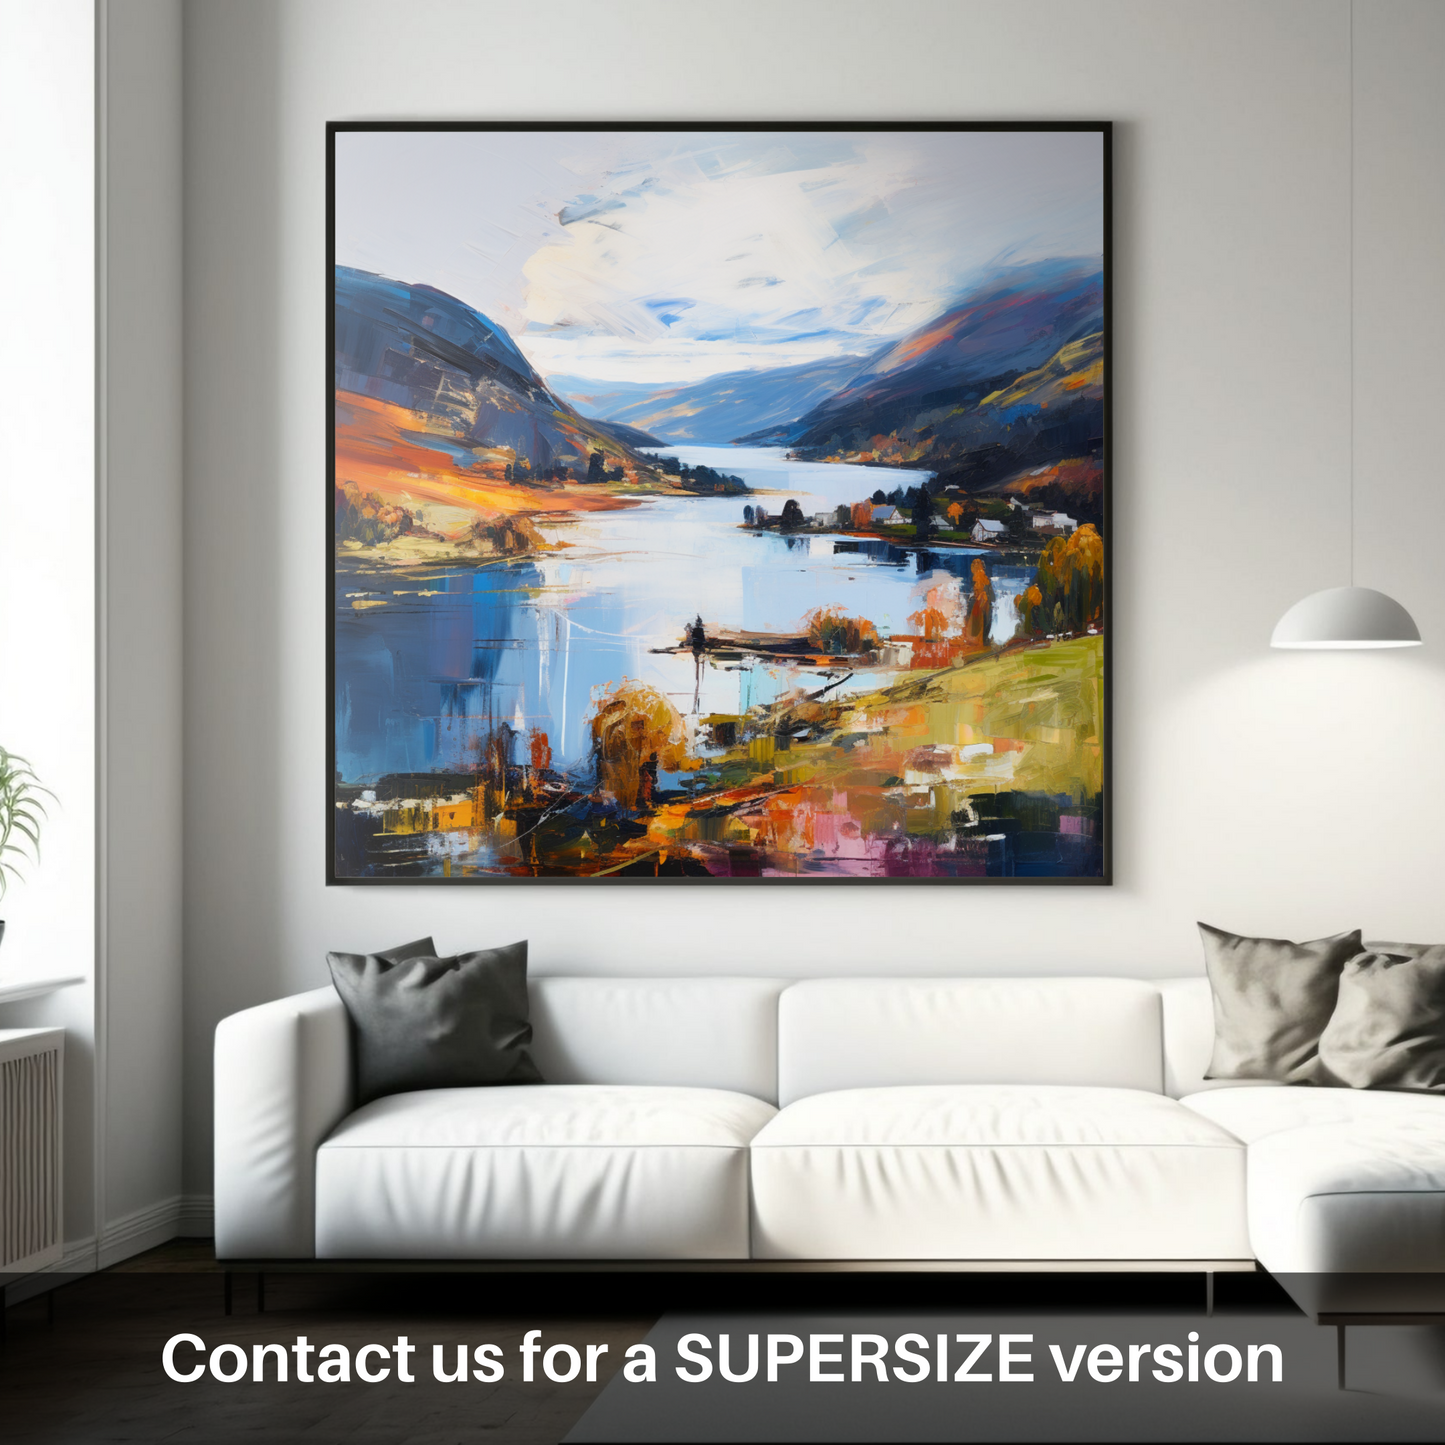 Huge supersize print of Loch Earn, Perth and Kinross